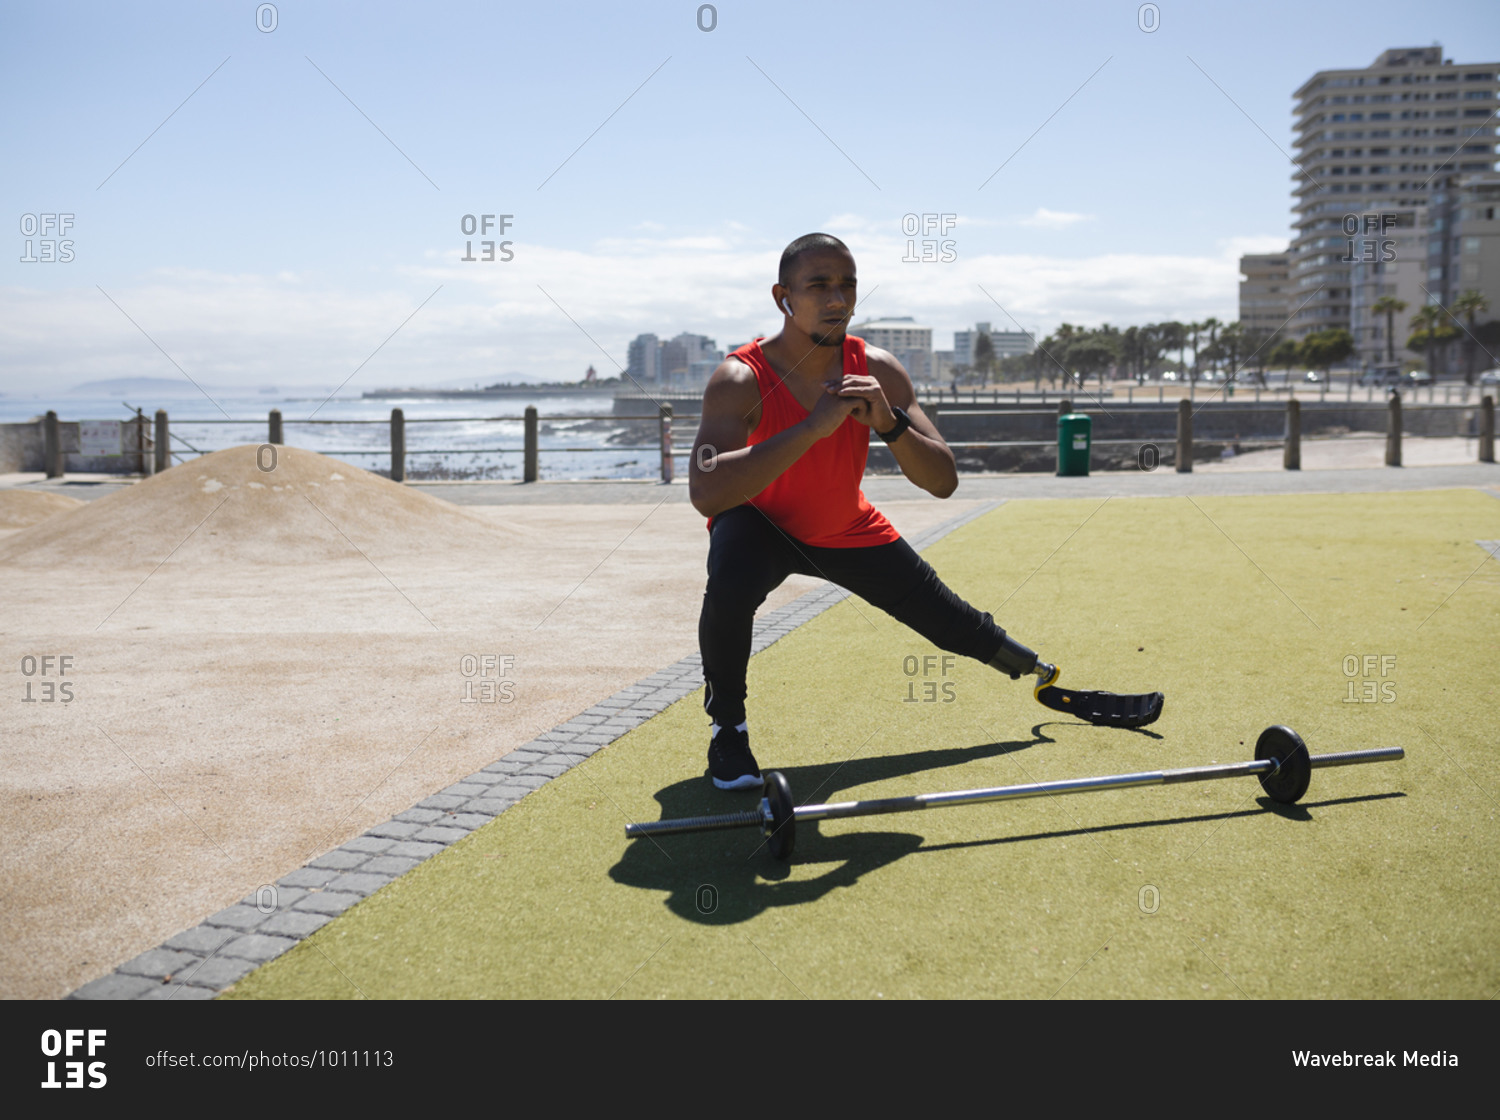 Disabled mixed race man with a prosthetic leg and running blade at an outdoor gym by the coast wearing wireless earphones, stretching legs, a barbell beside him. Fitness disability healthy lifestyle.